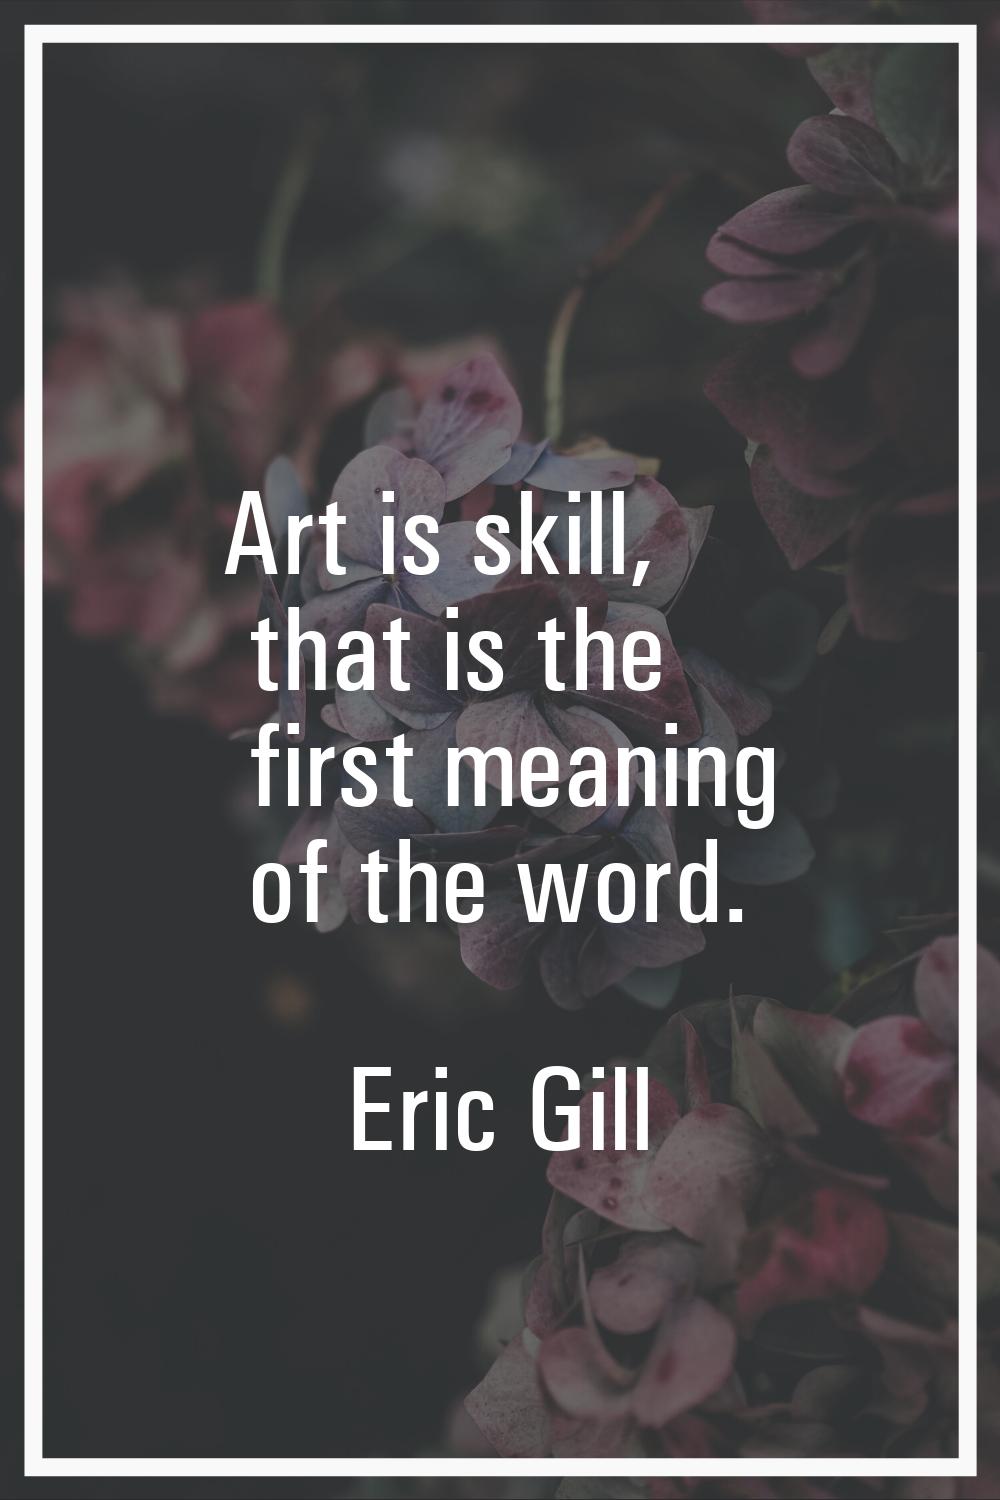 Art is skill, that is the first meaning of the word.